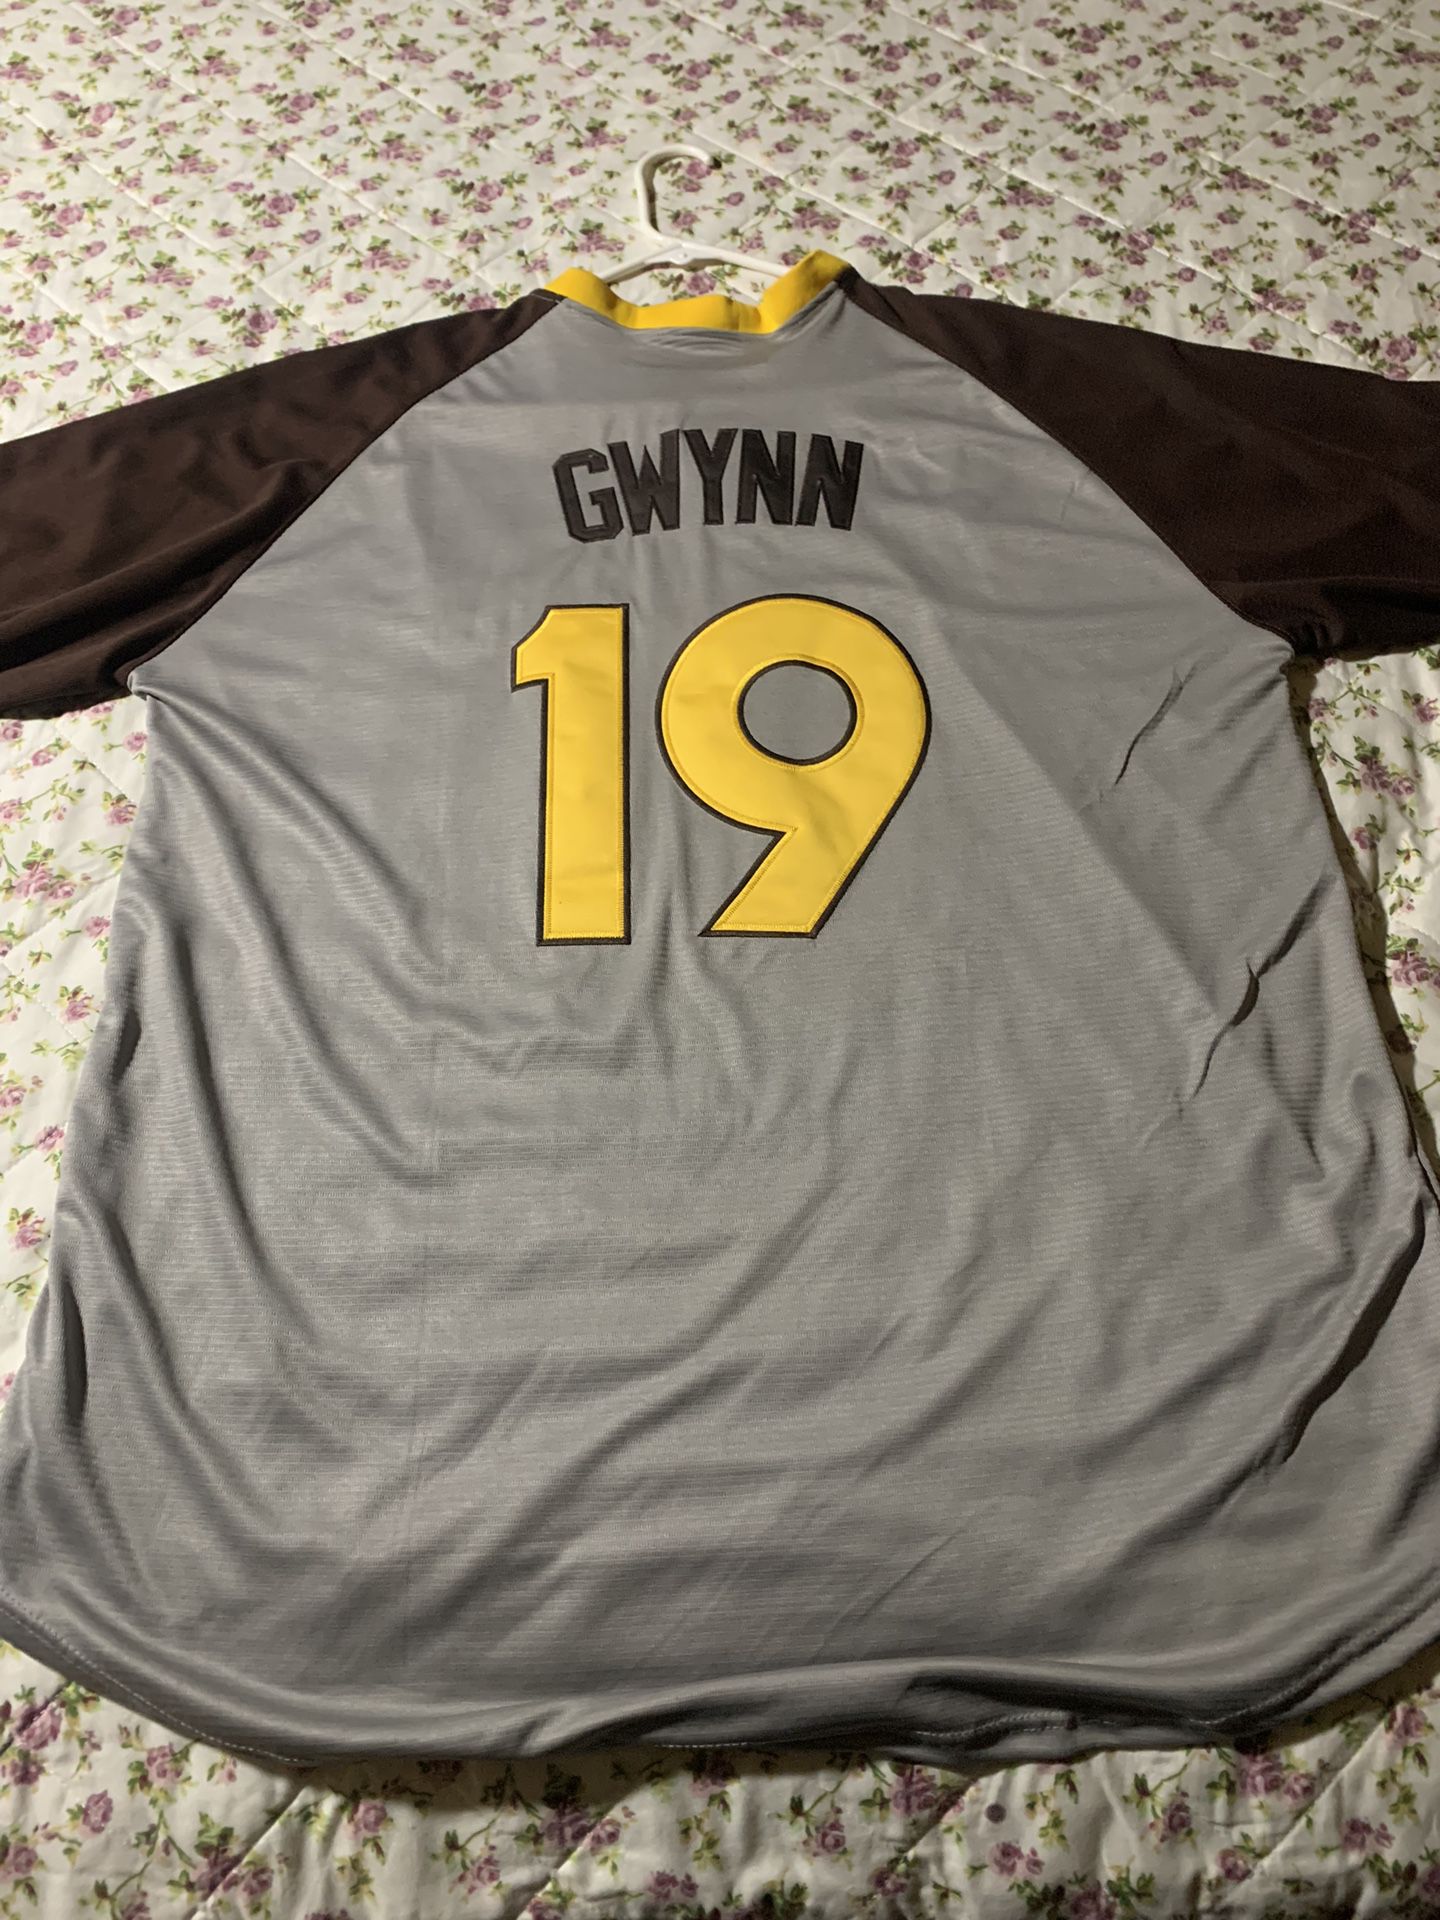 San Diego Padres Tony Gwynn Cooperstown Collection Authentic Nike Pinstripe  Jersey for Sale in Chula Vista, CA - OfferUp